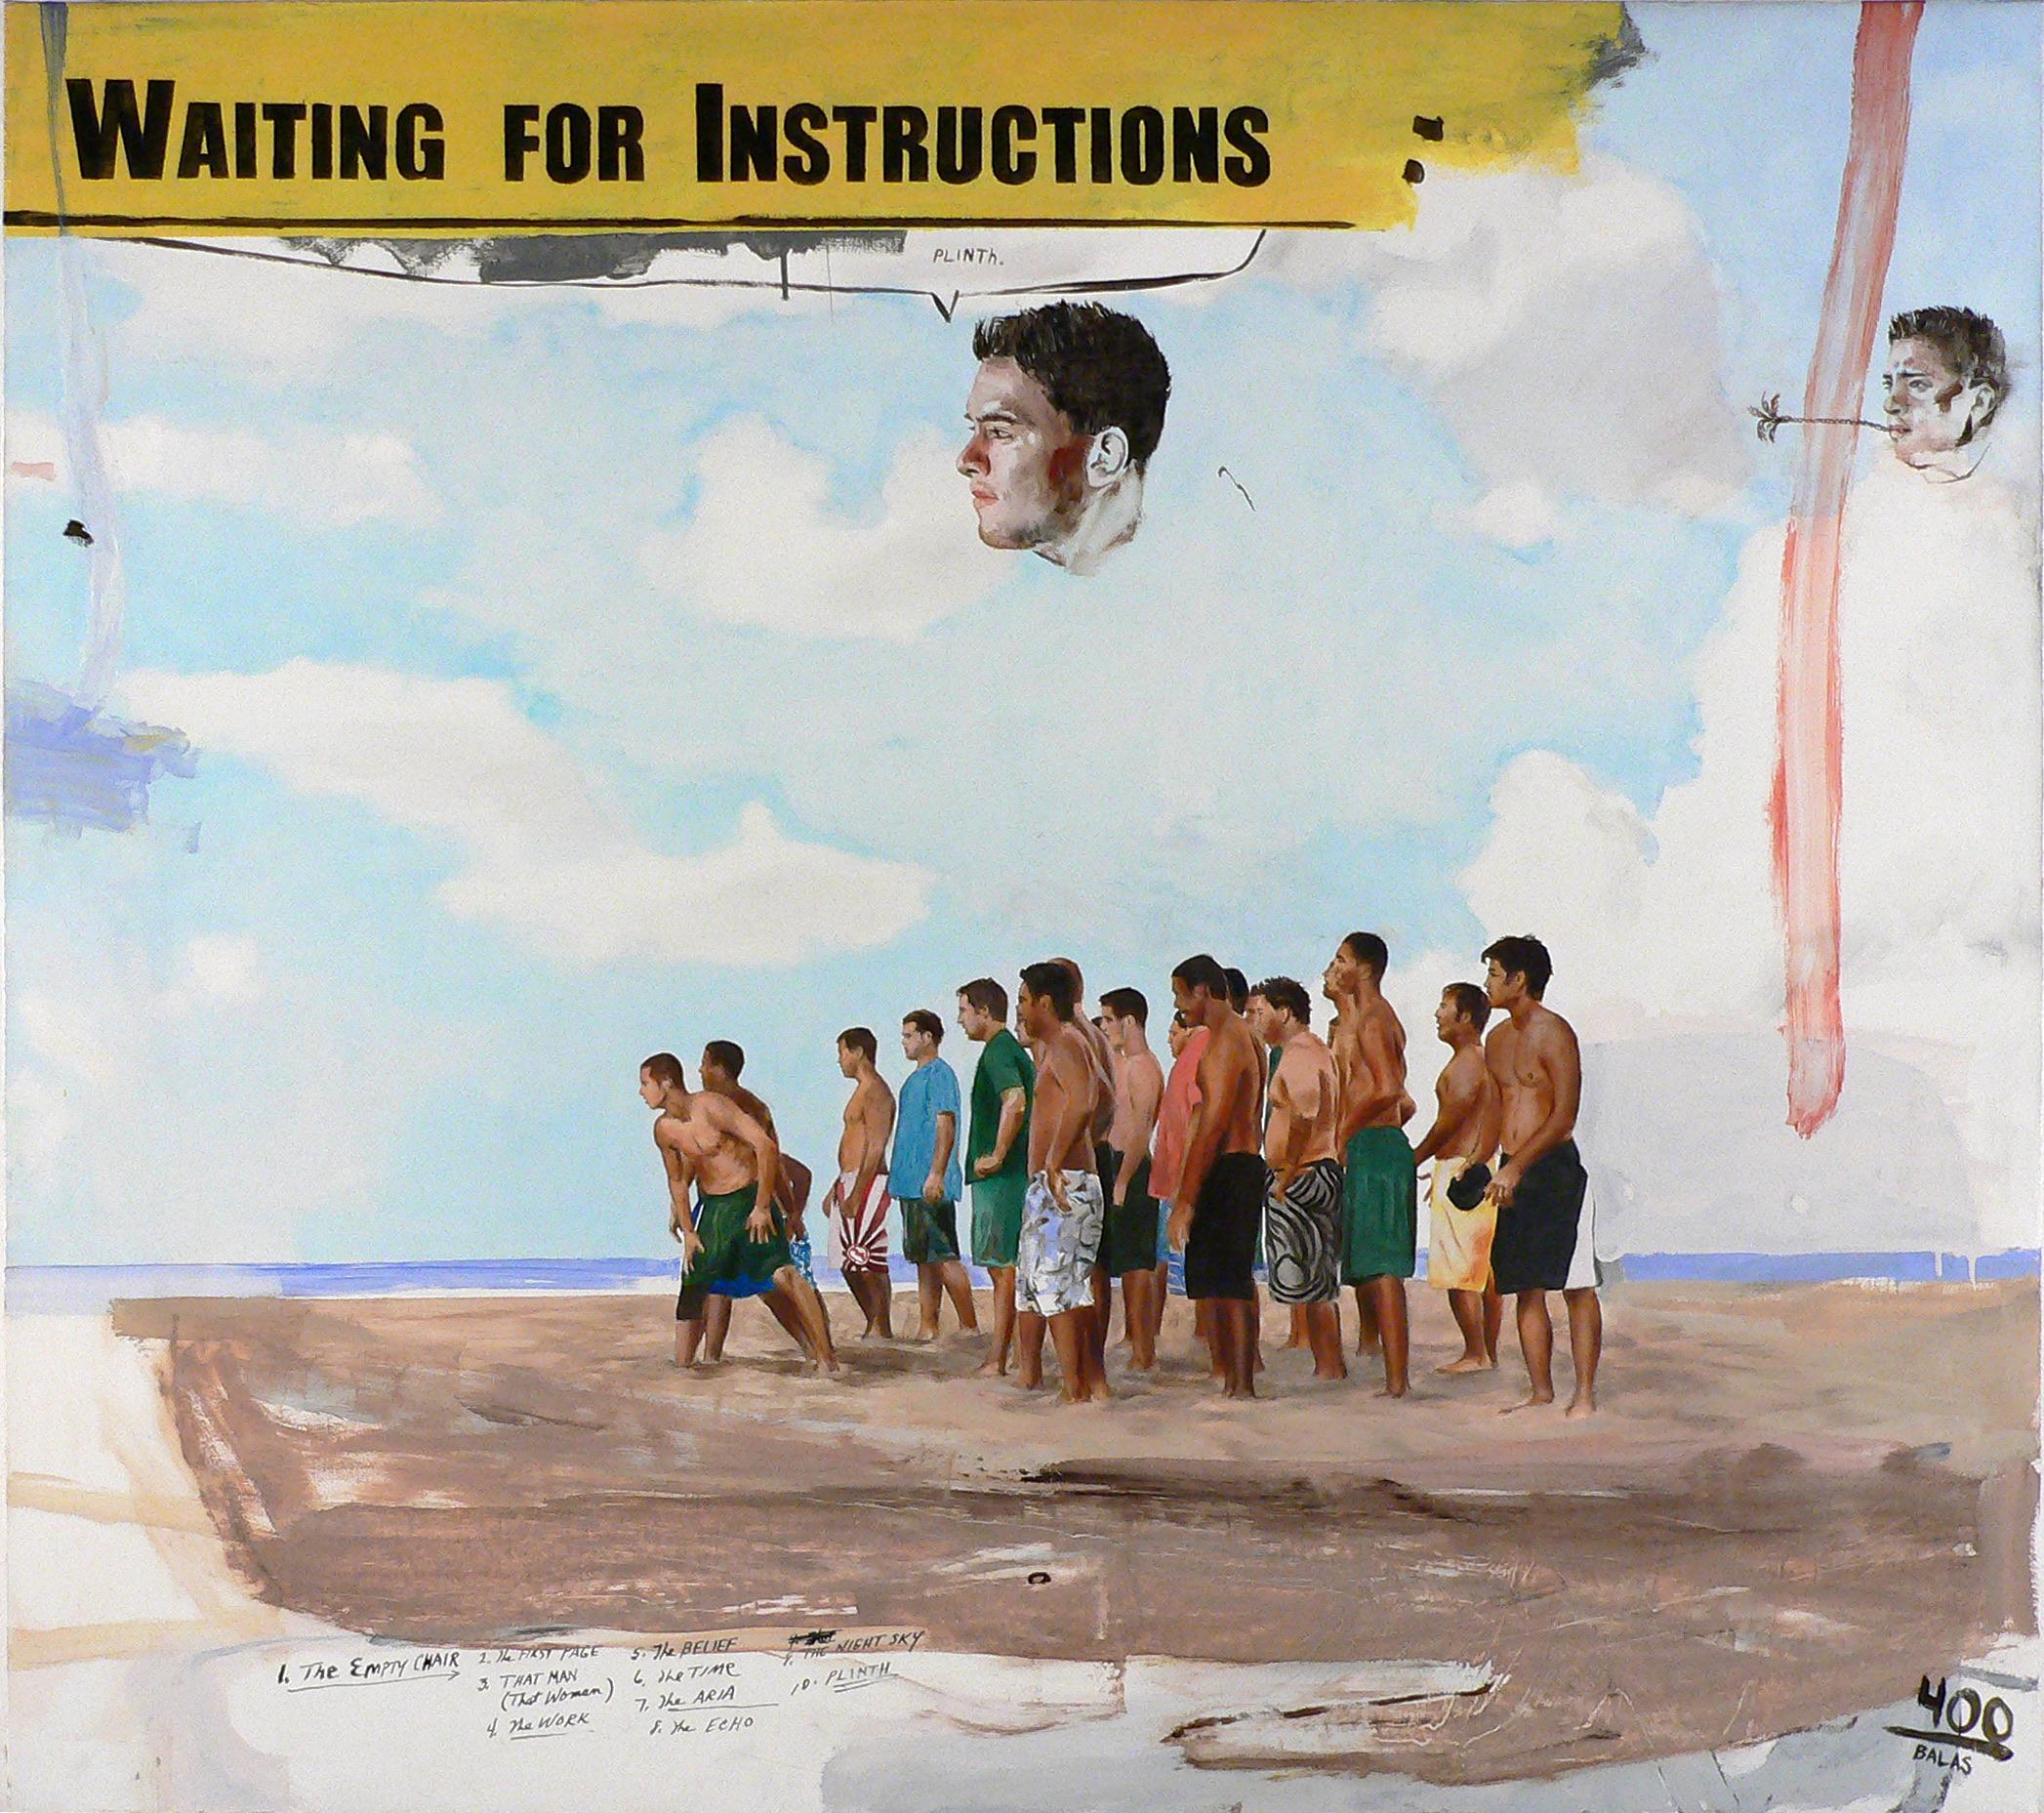 Waiting for Instructions, Plinth (#400) - Painting by Jack Balas